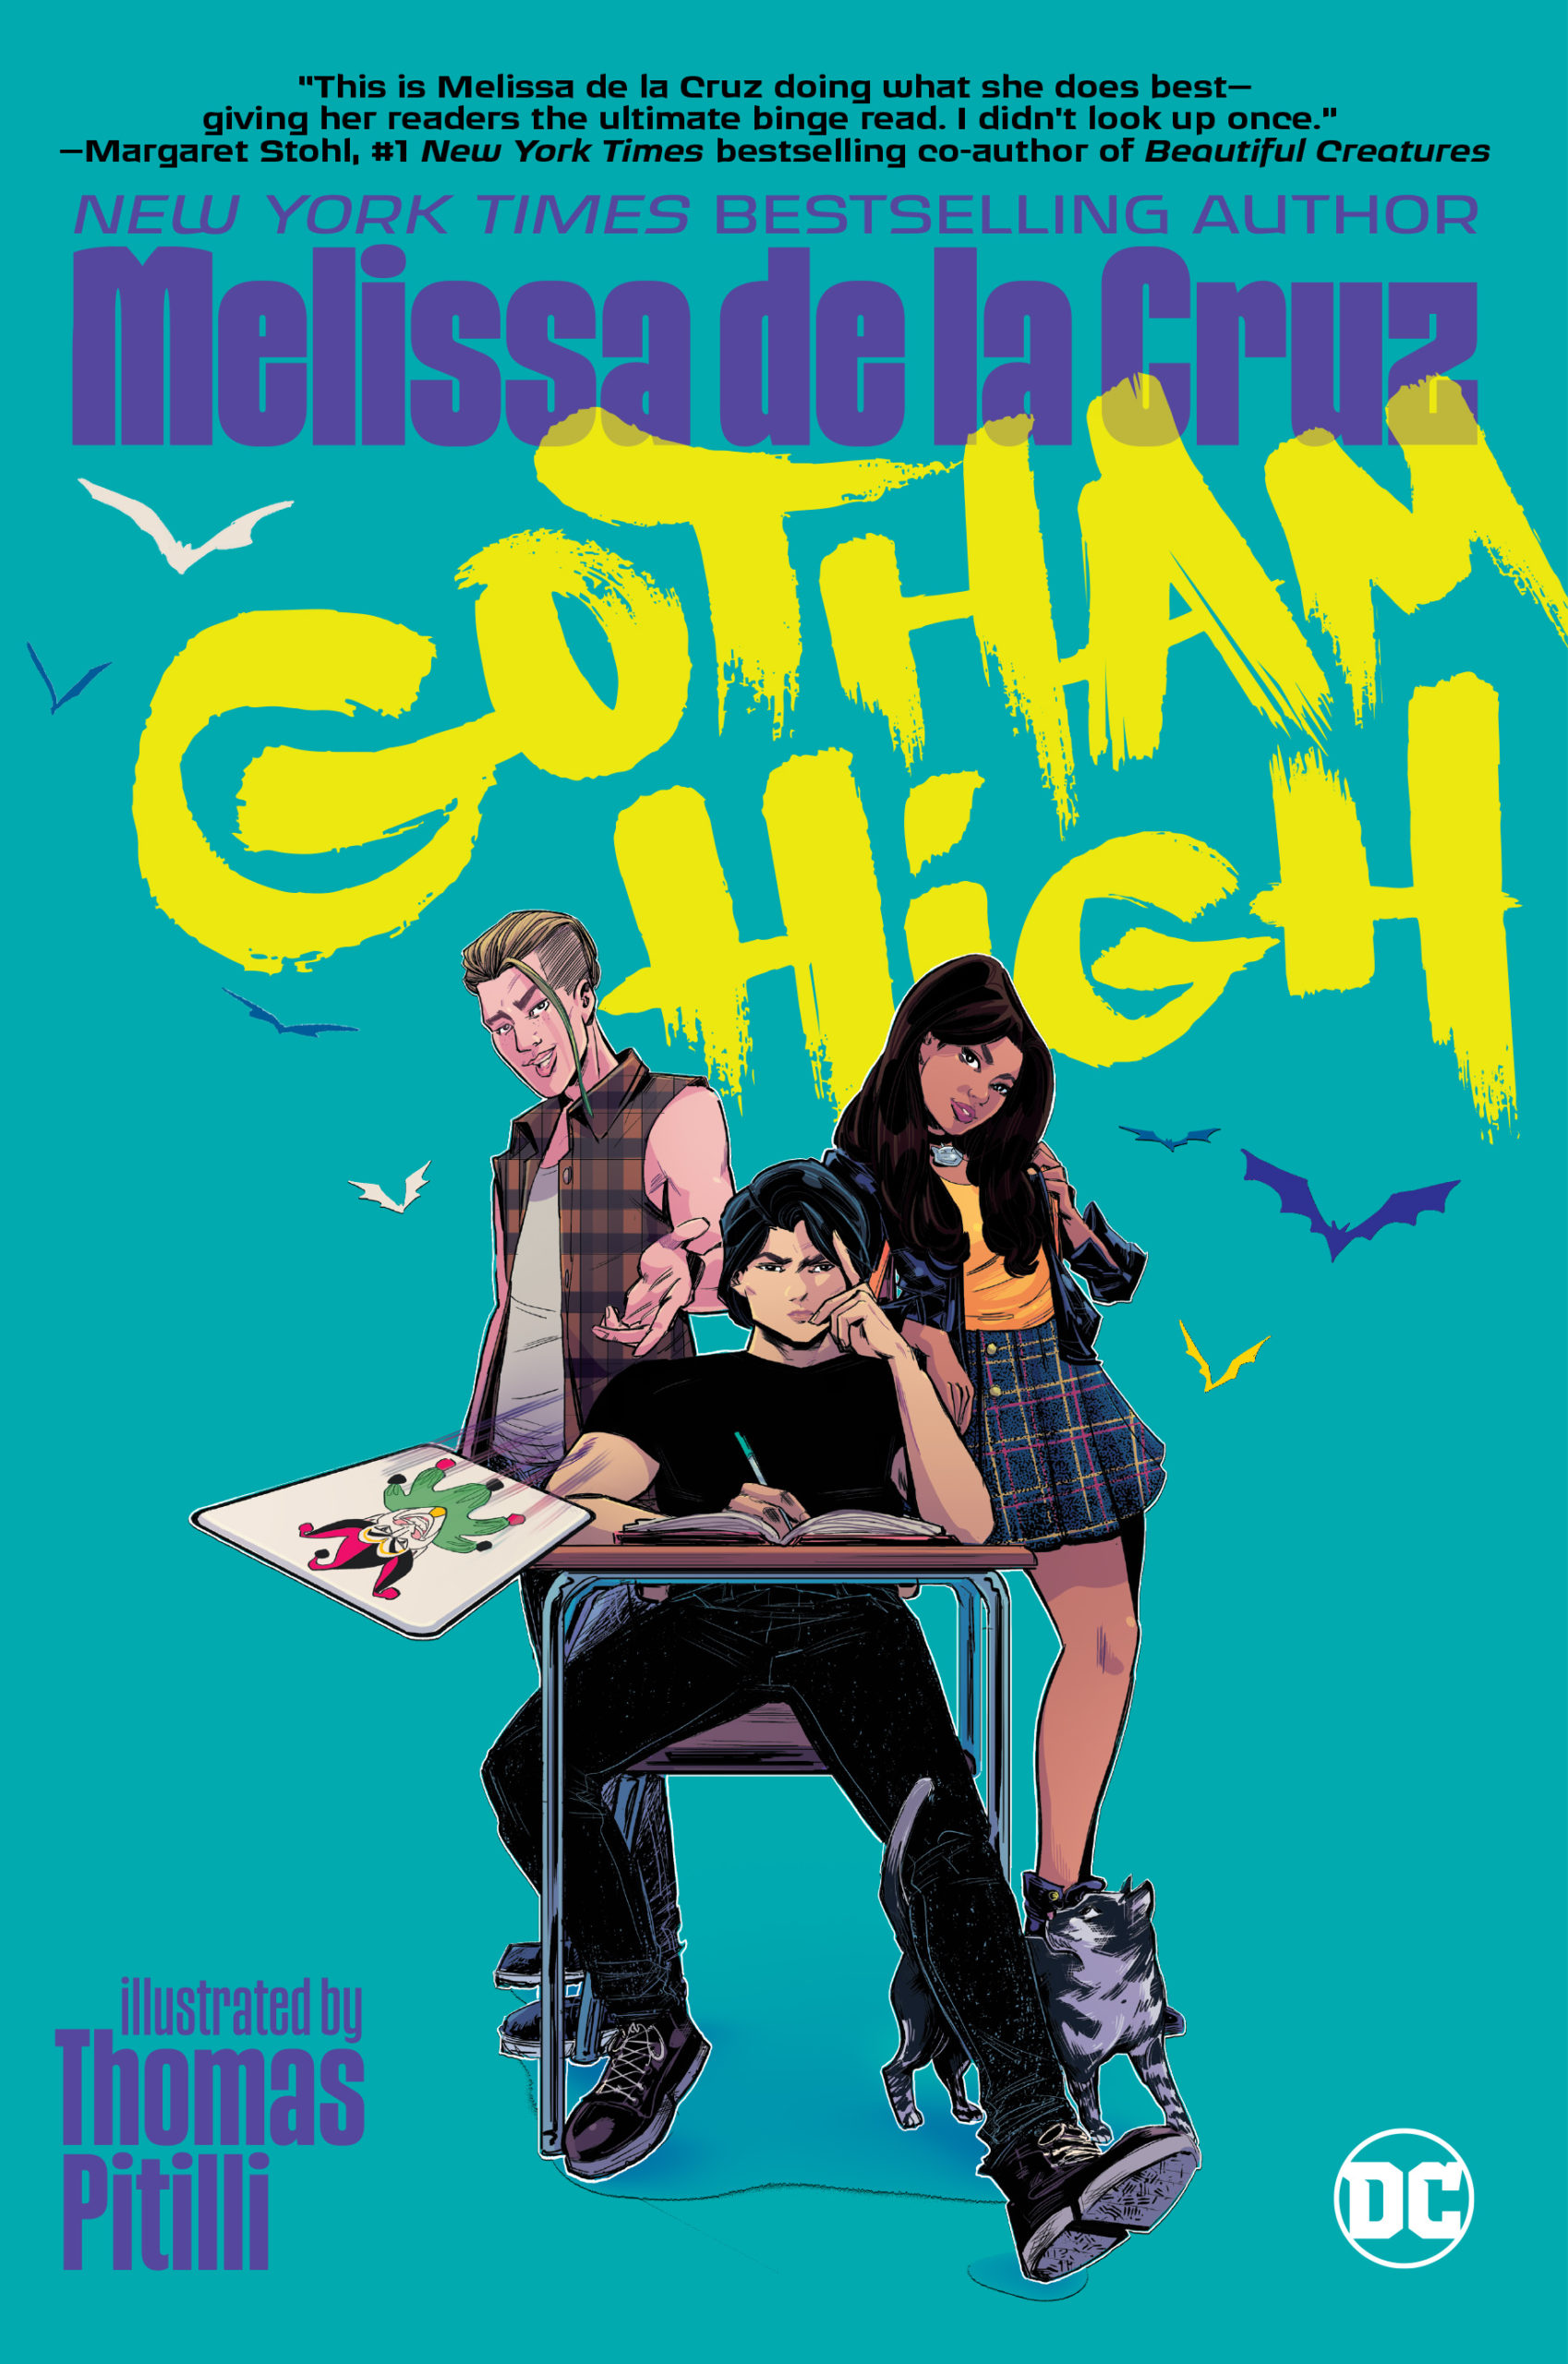 The Batman adaptaiton moves the story to a high school